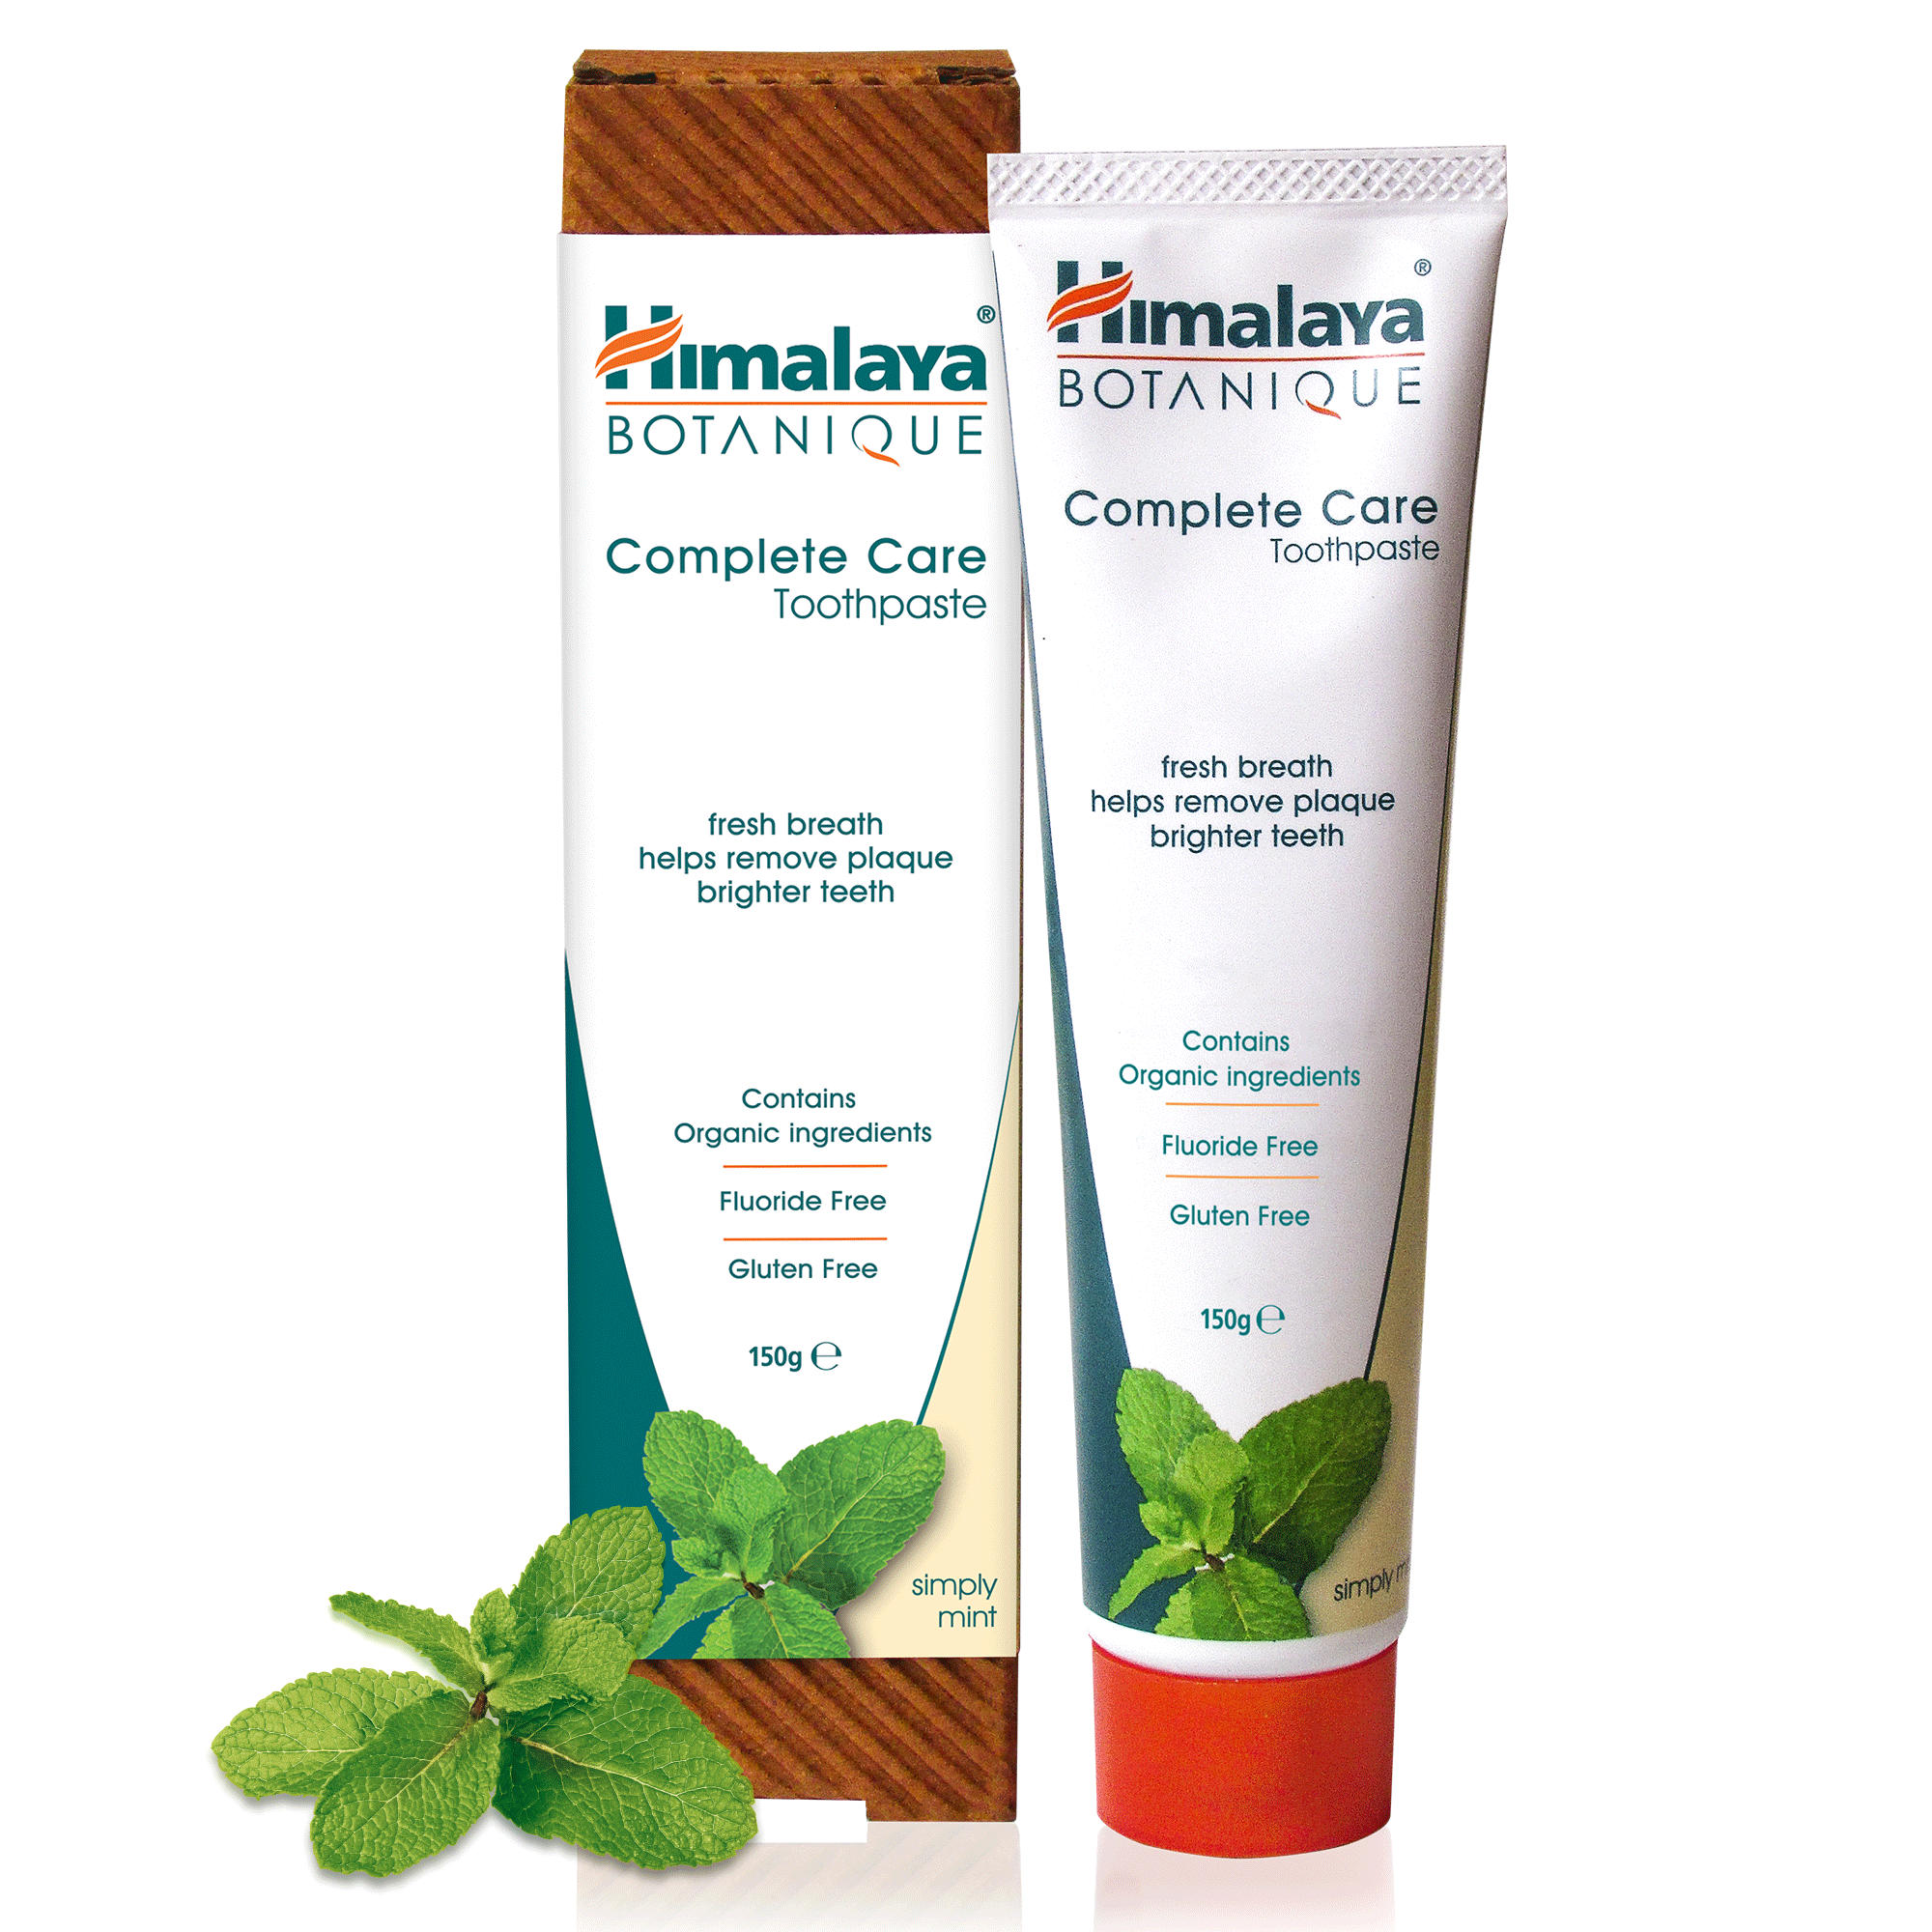 Himalaya BOTANIQUE Complete Care Toothpaste - Simply Mint 150g